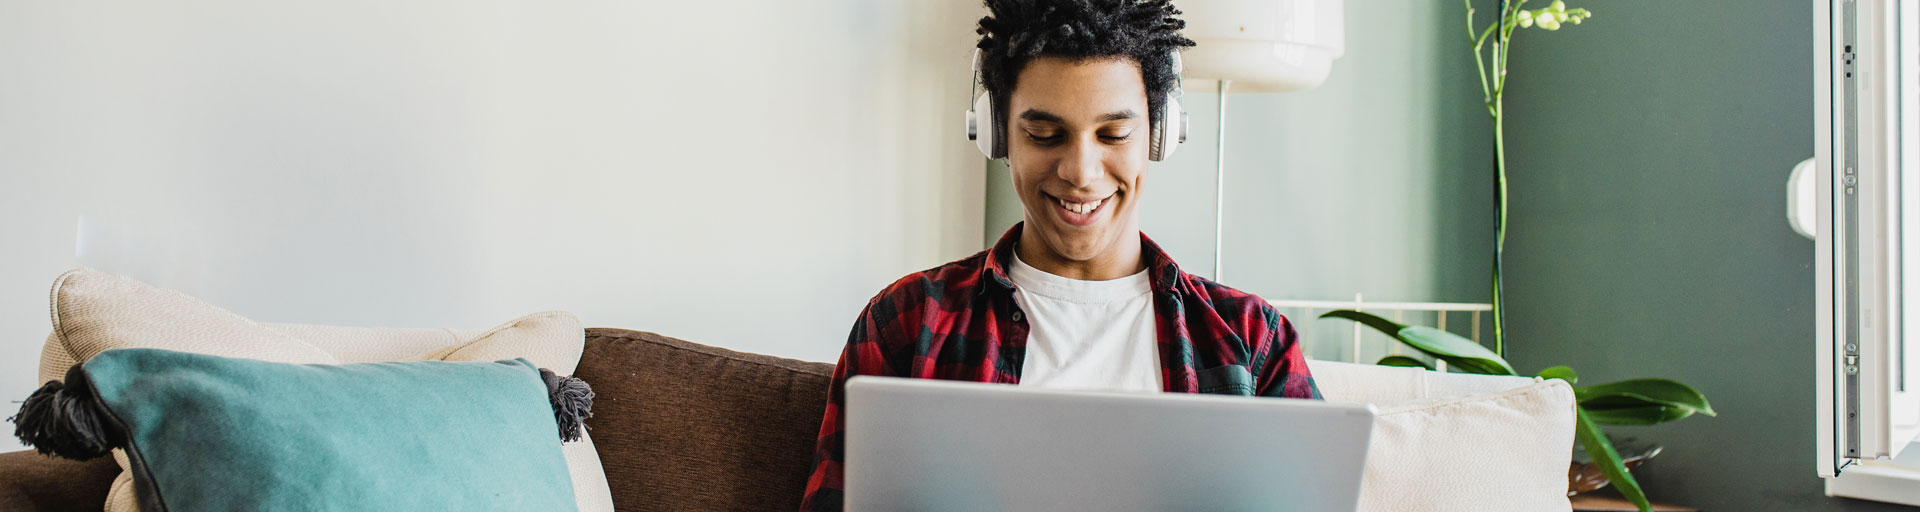 male student sitting on a couch, wearing headphones smiling at the laptop he is using